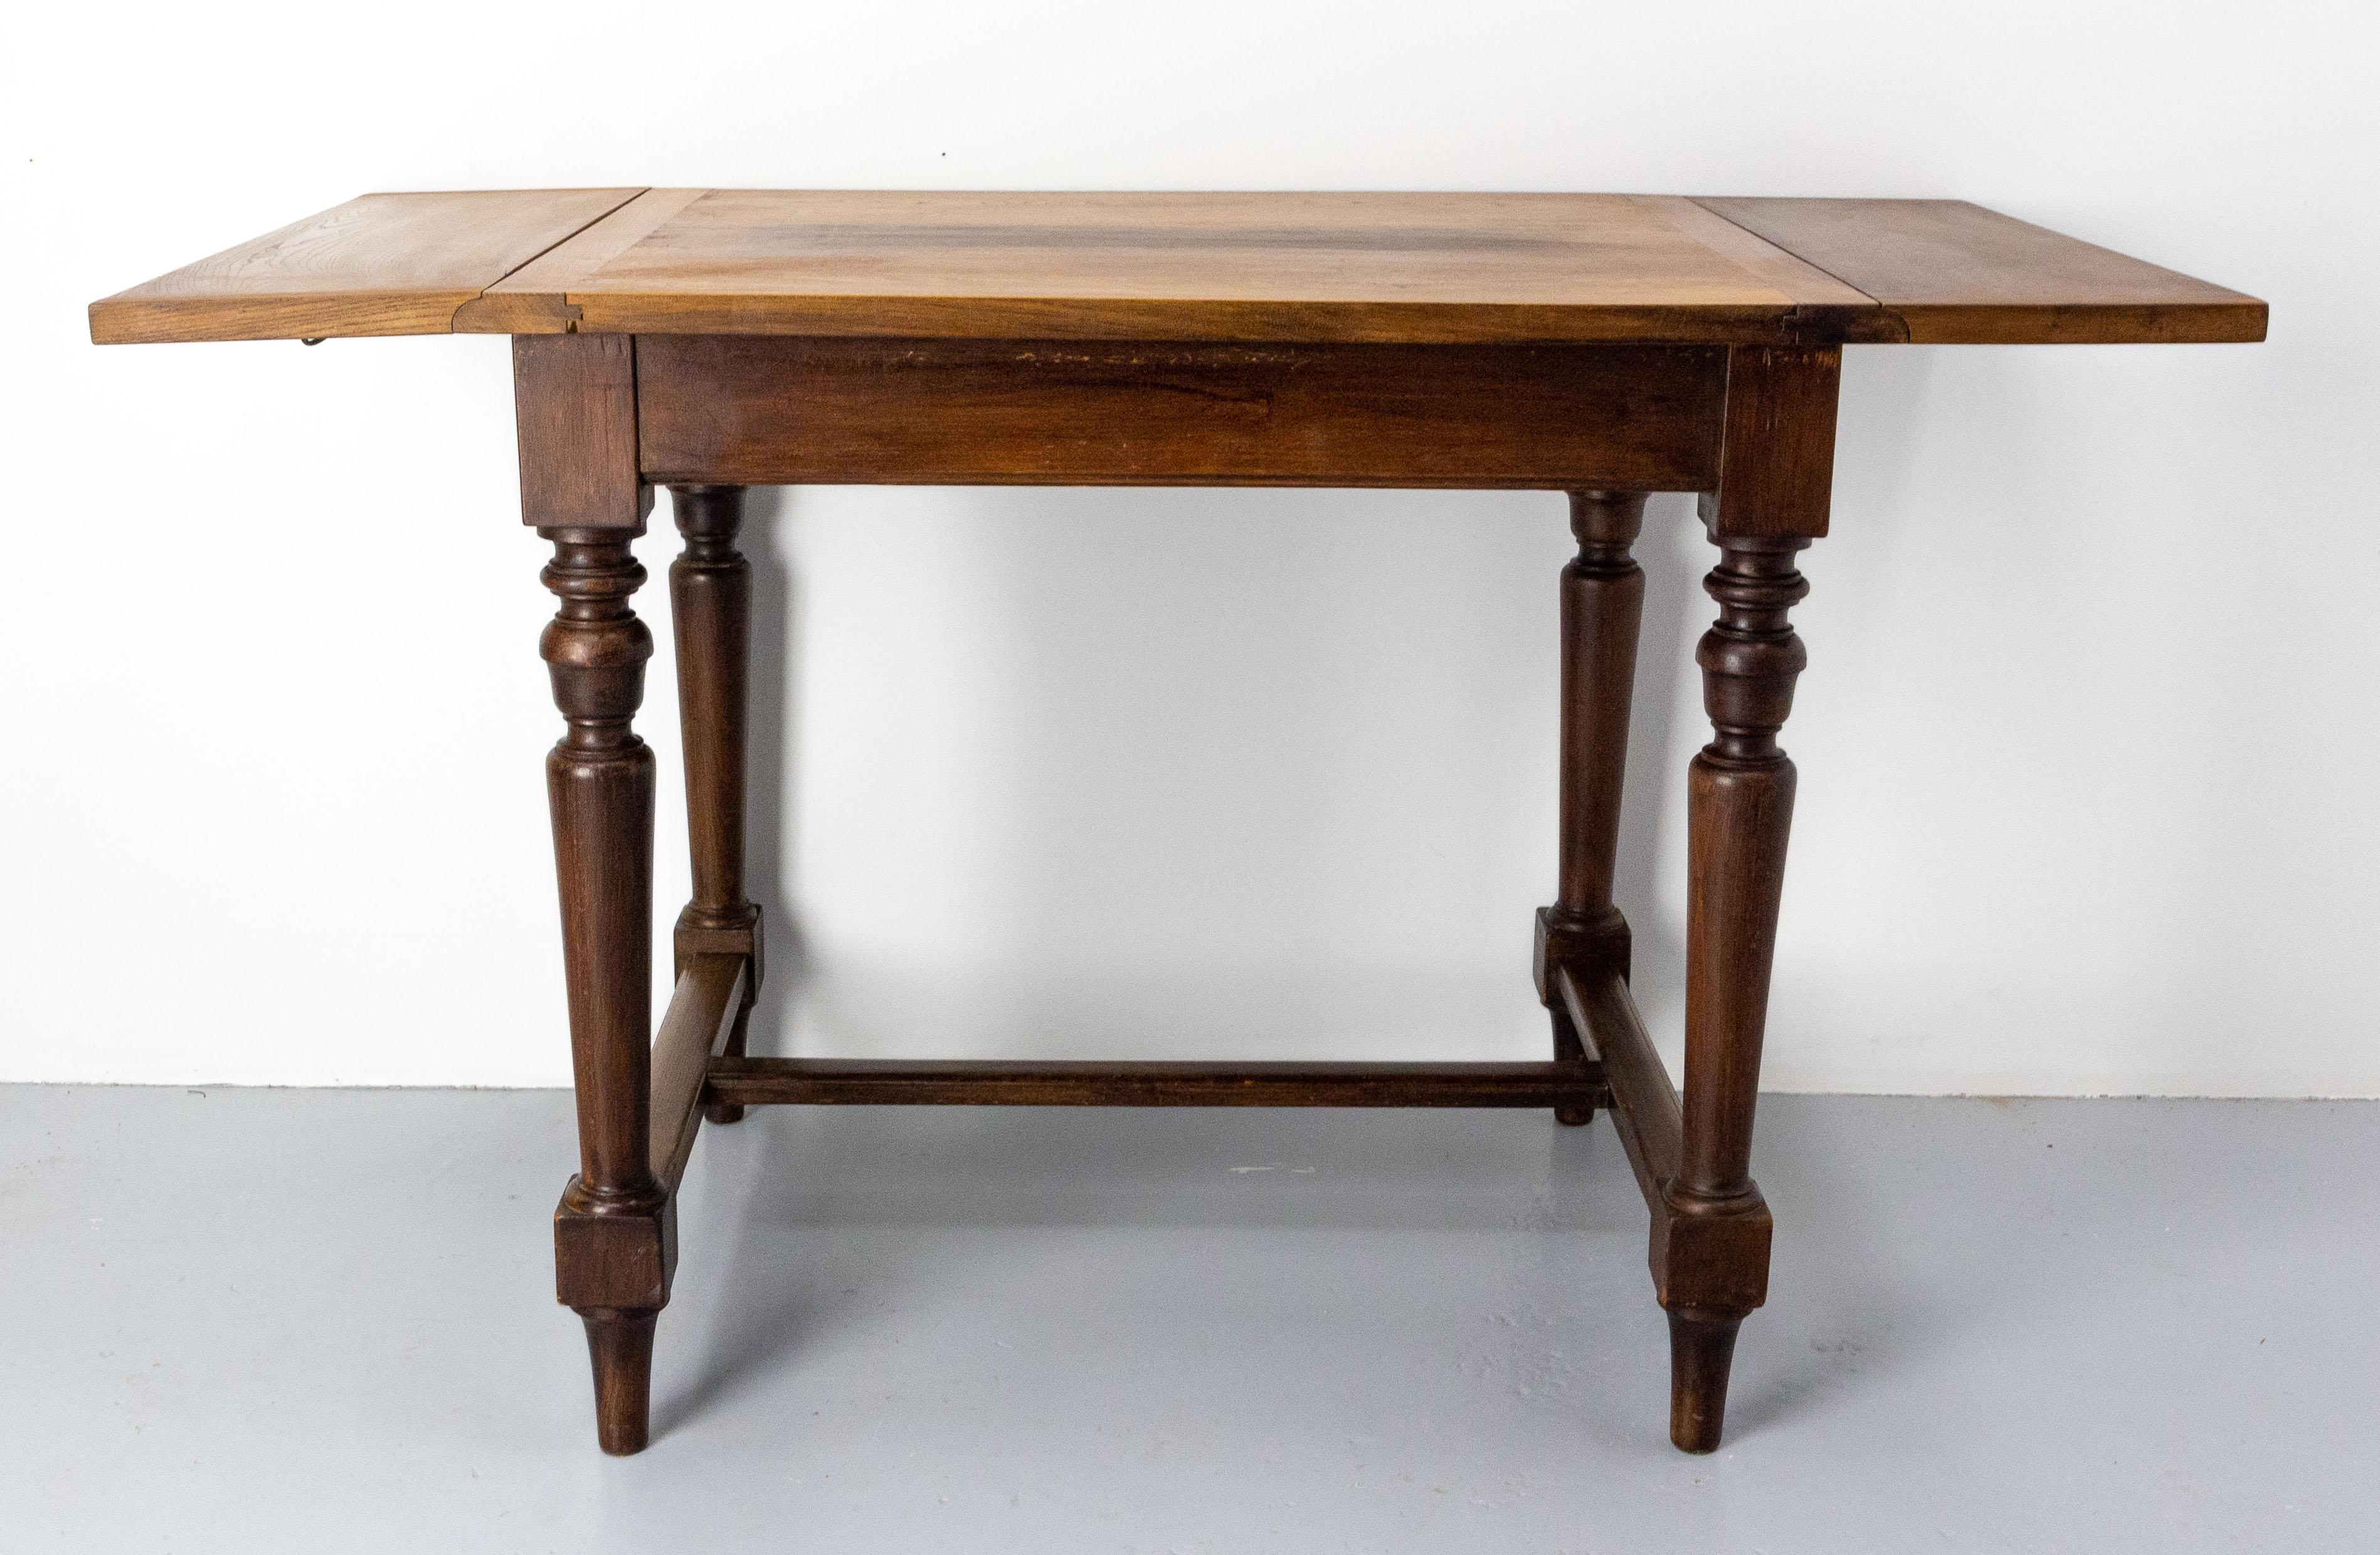 Little chestnut dining table. The two end are foldable and the little width of this table is 32.28 in. (82 cm) 
The table top was made circa 1970. It was laid on a beech base dating of the late 19th century.
Good antique condition, with signs of